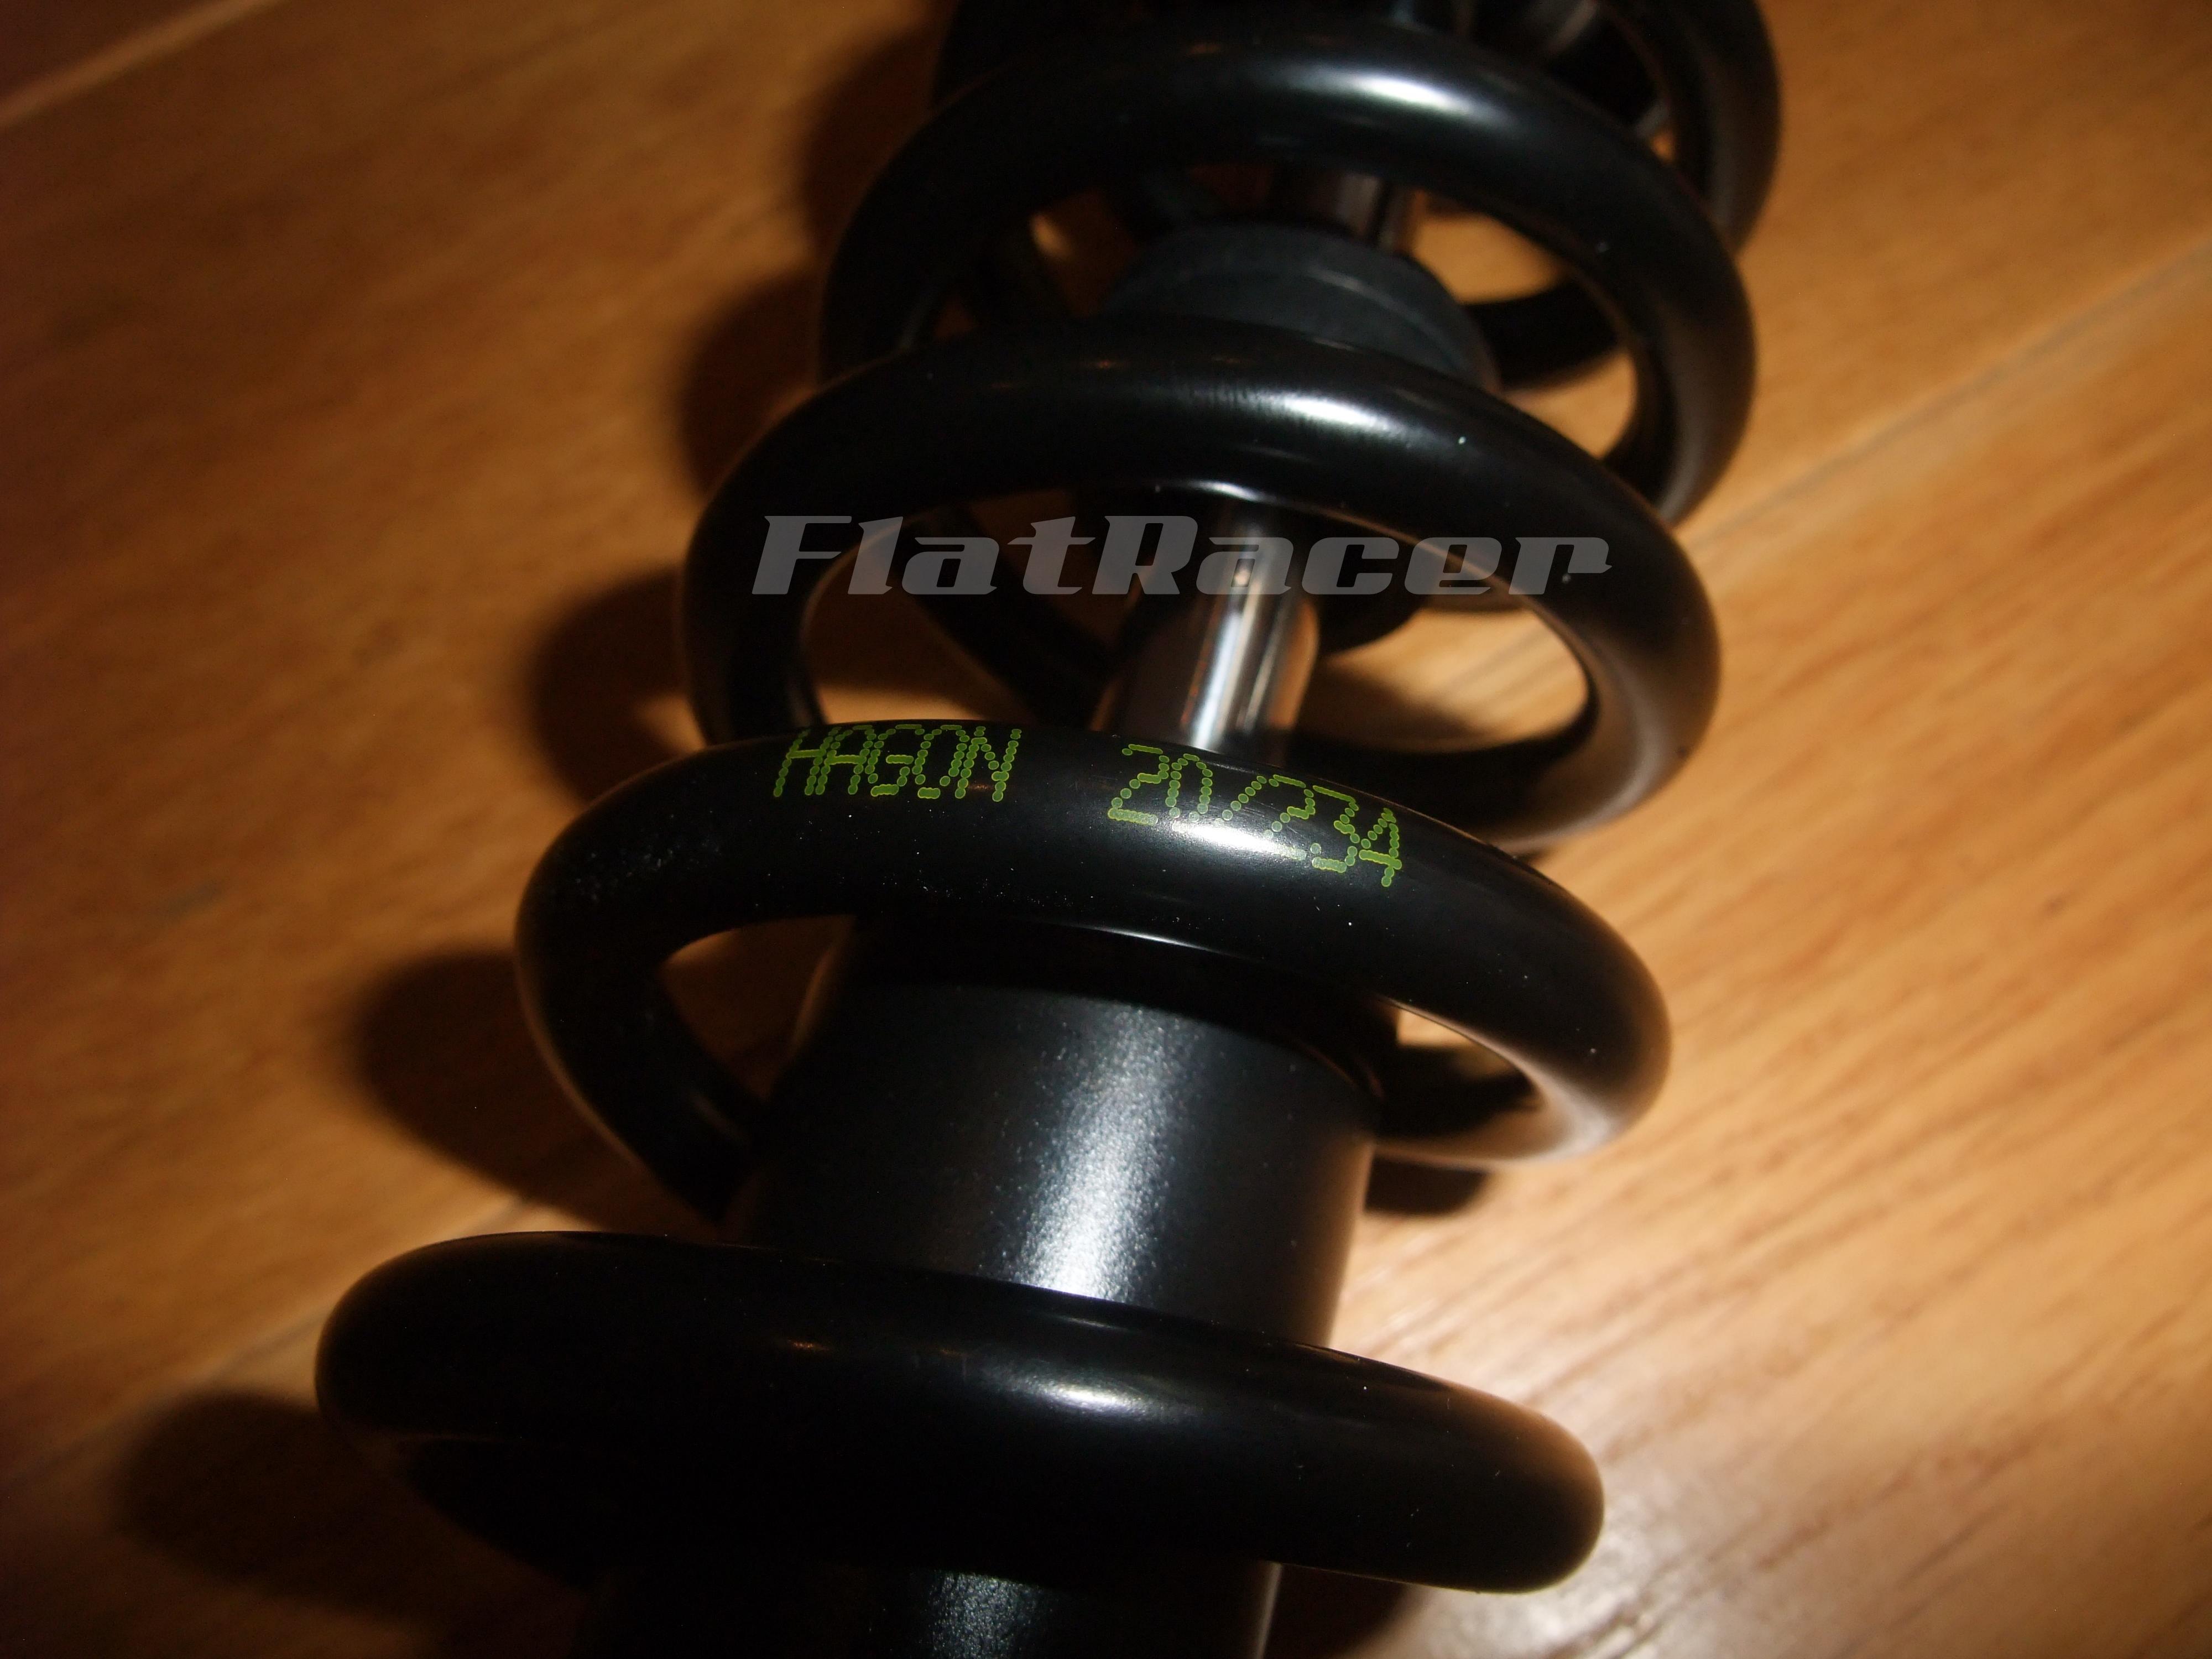 Hagon Classic A road shock absorbers - pair